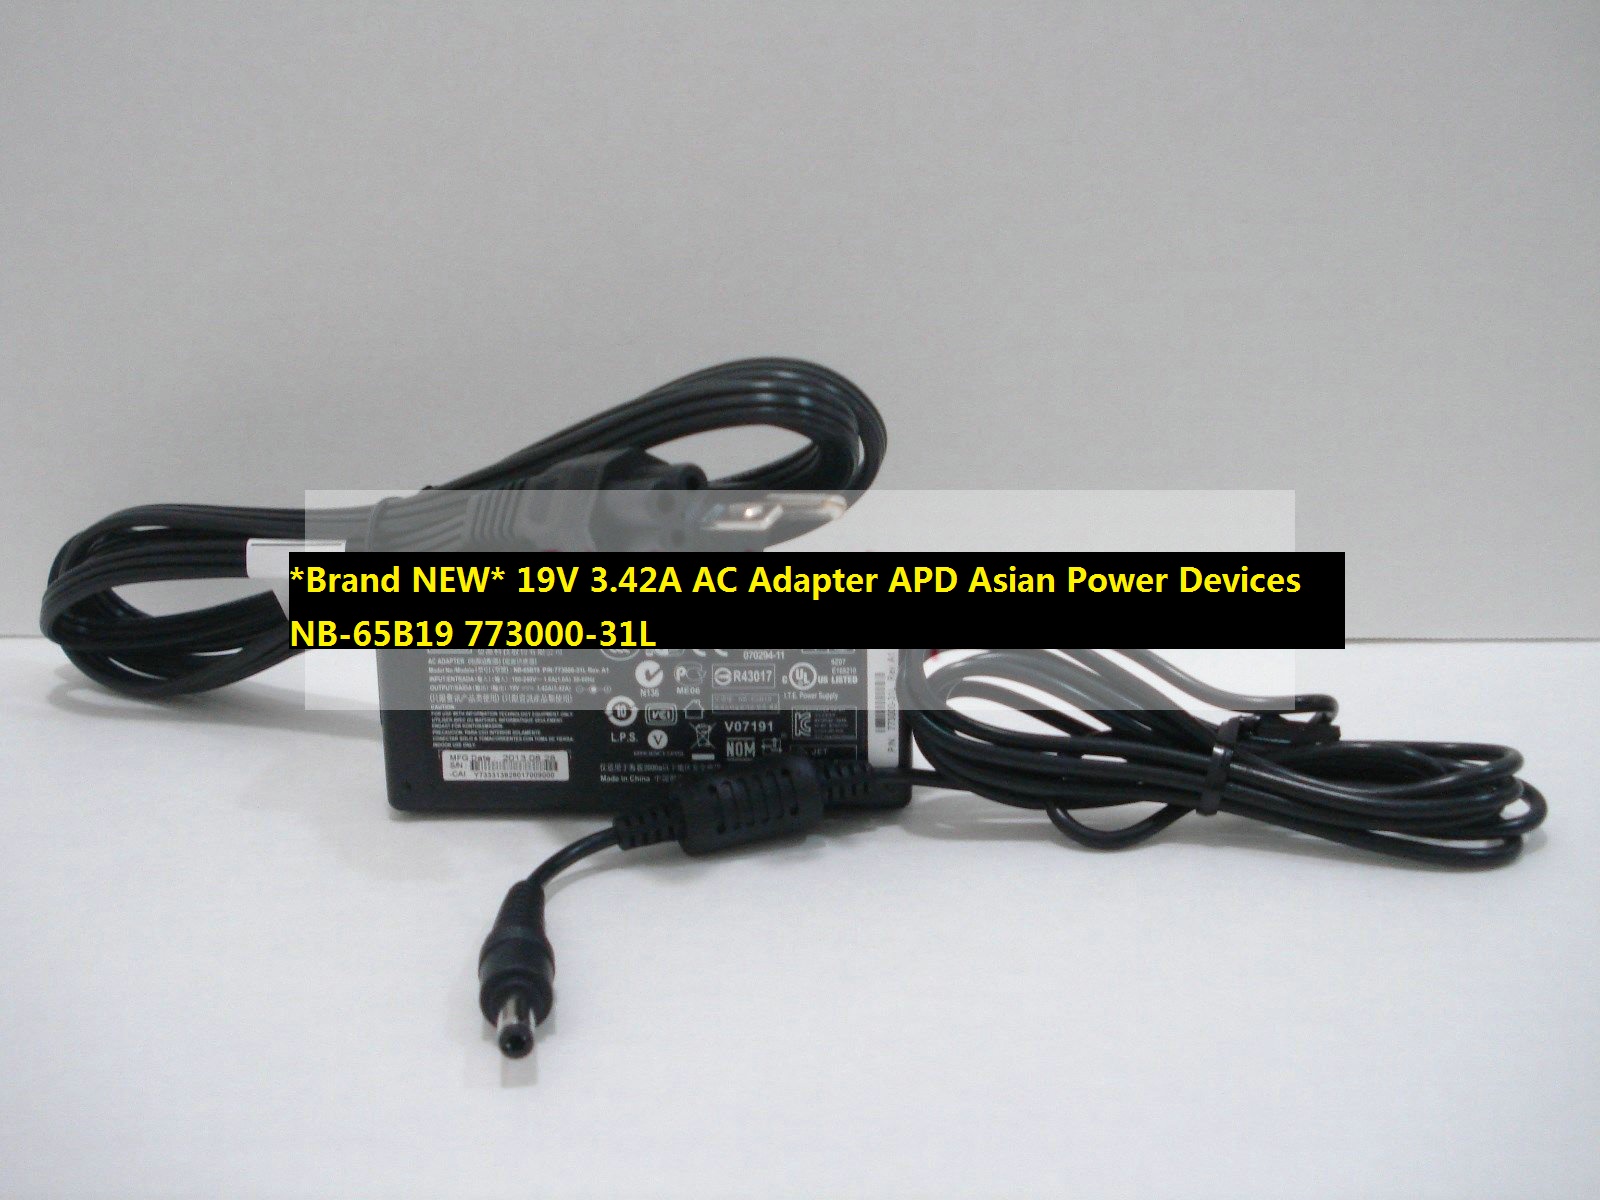 *Brand NEW* 19V 3.42A AC Adapter APD Asian Power Devices NB-65B19 773000-31L - Click Image to Close